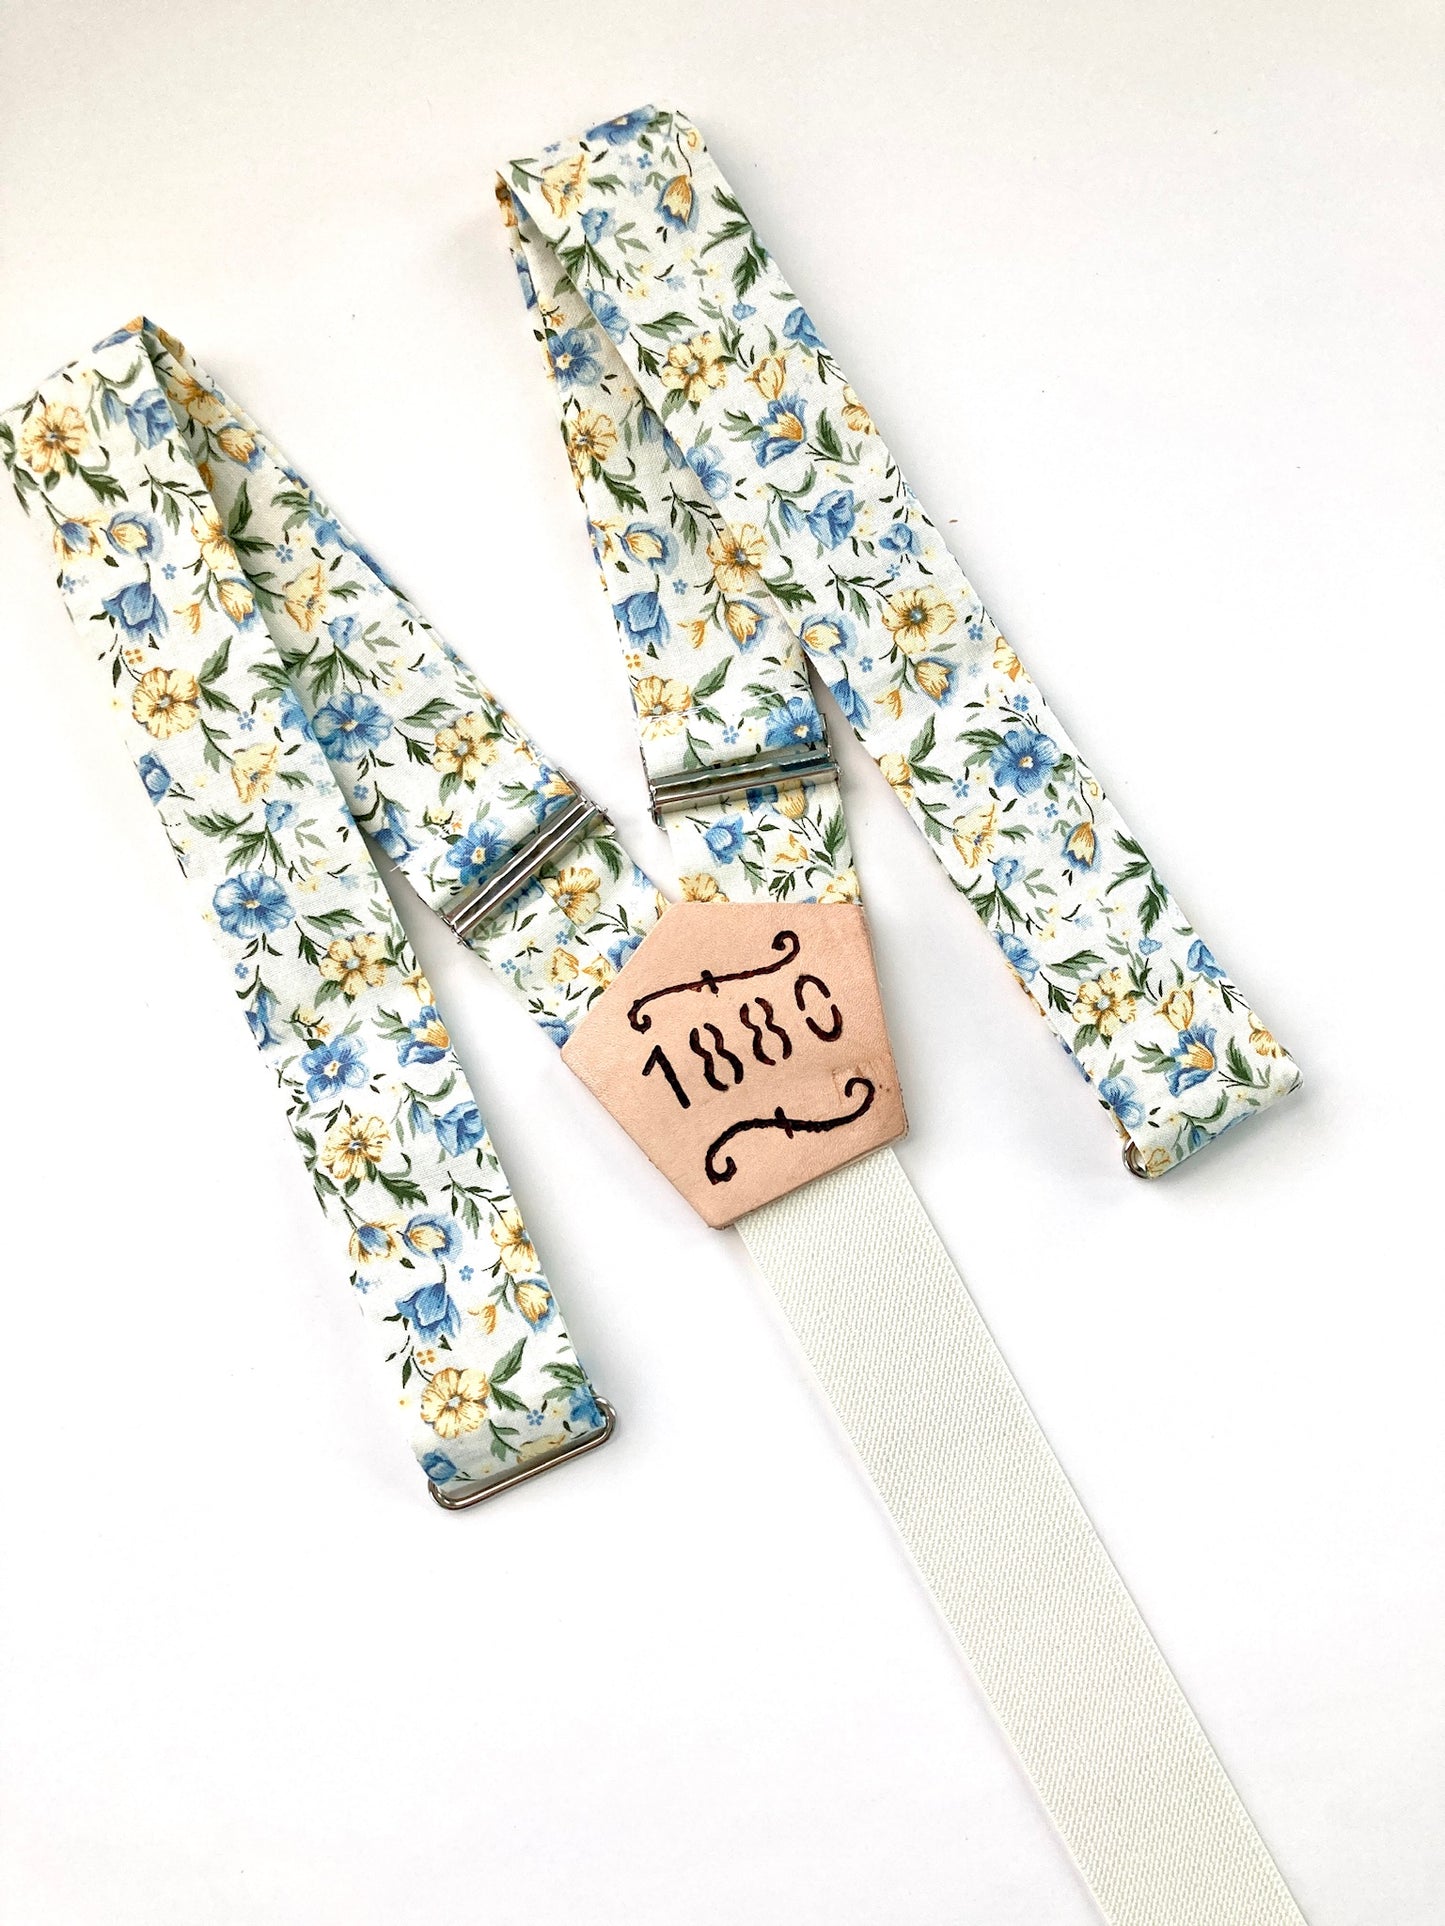 Stratton Suspenders Cream Floral Straps of the Limited Edition 1880 Vintage Collection